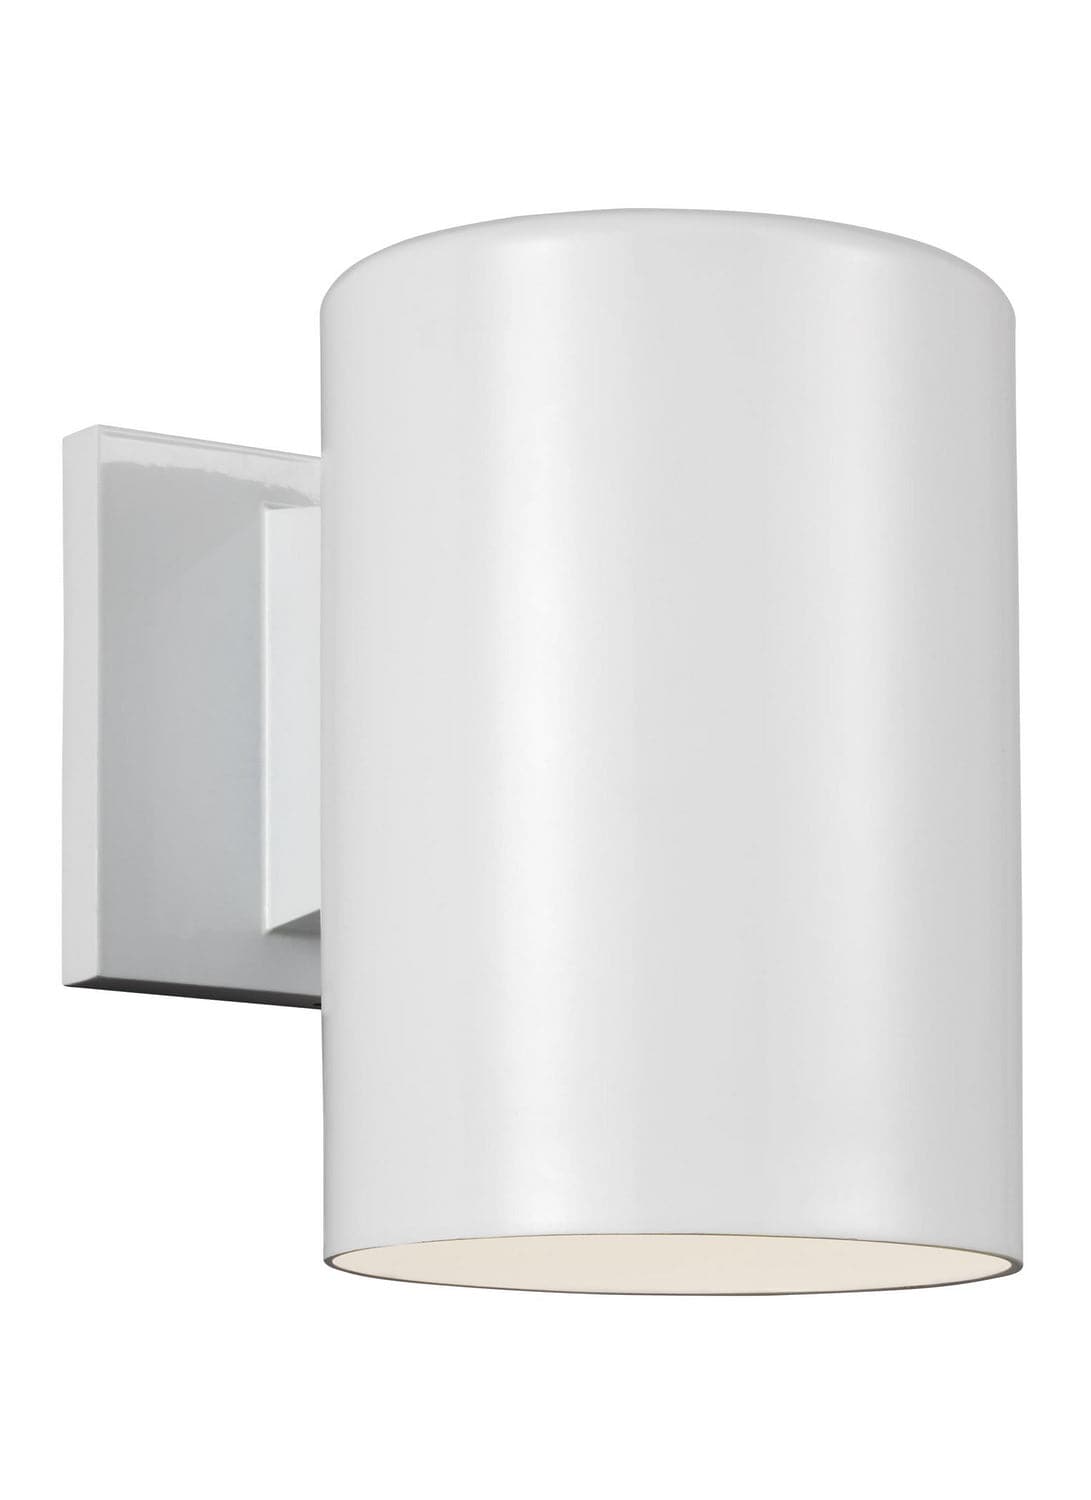 Visual Comfort Studio - 8313801-15/T - One Light Outdoor Wall Lantern - Outdoor Cylinders - White